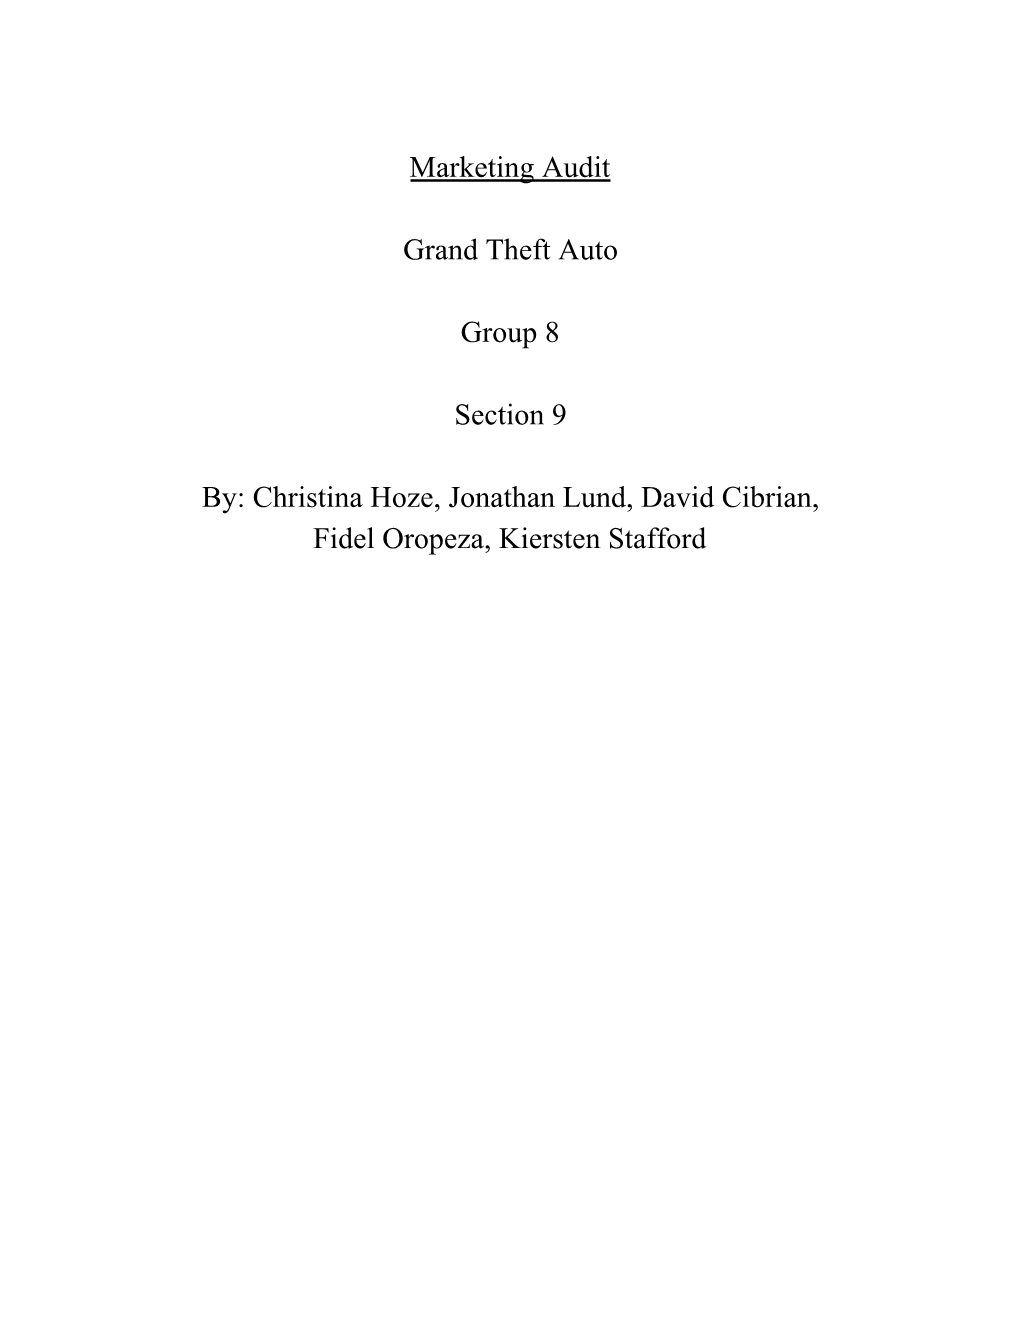 Marketing Audit Grand Theft Auto Group 8 Section 9 By